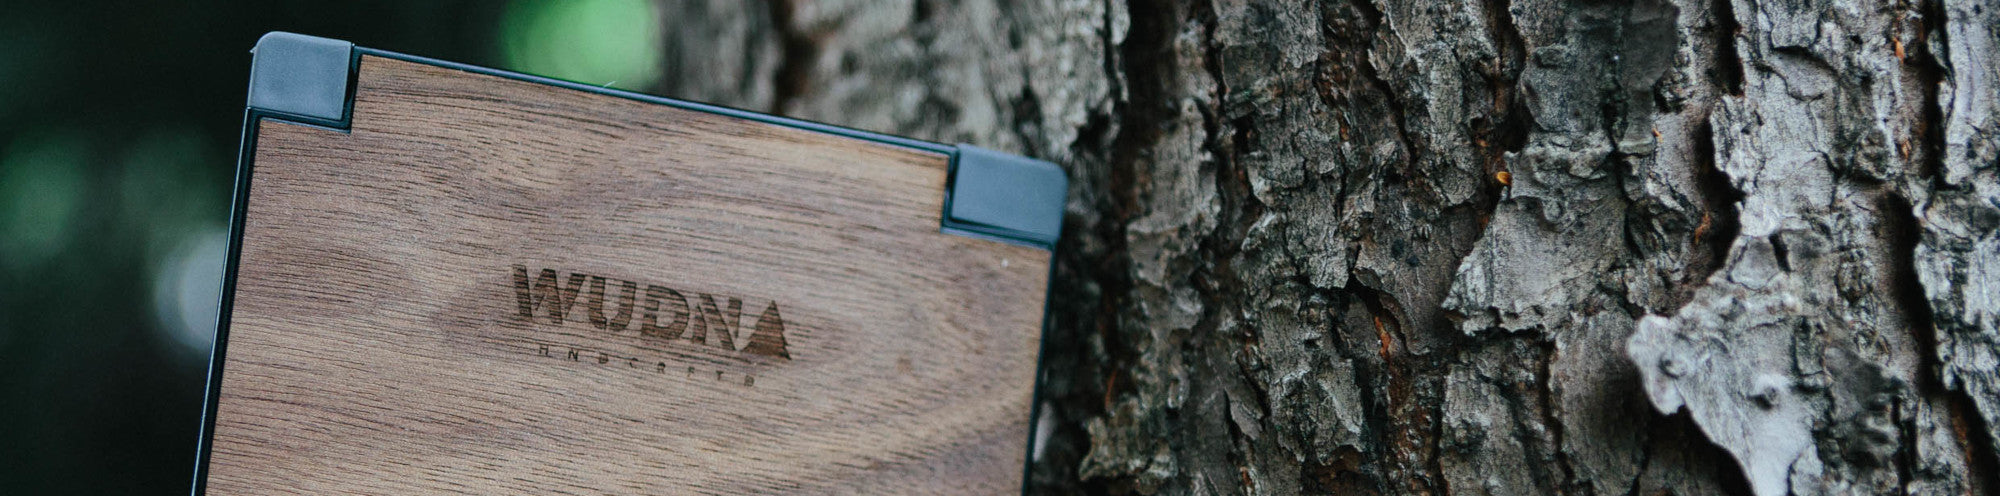 Wooden Powerbanks & Wooden Chargers for your iPhone 